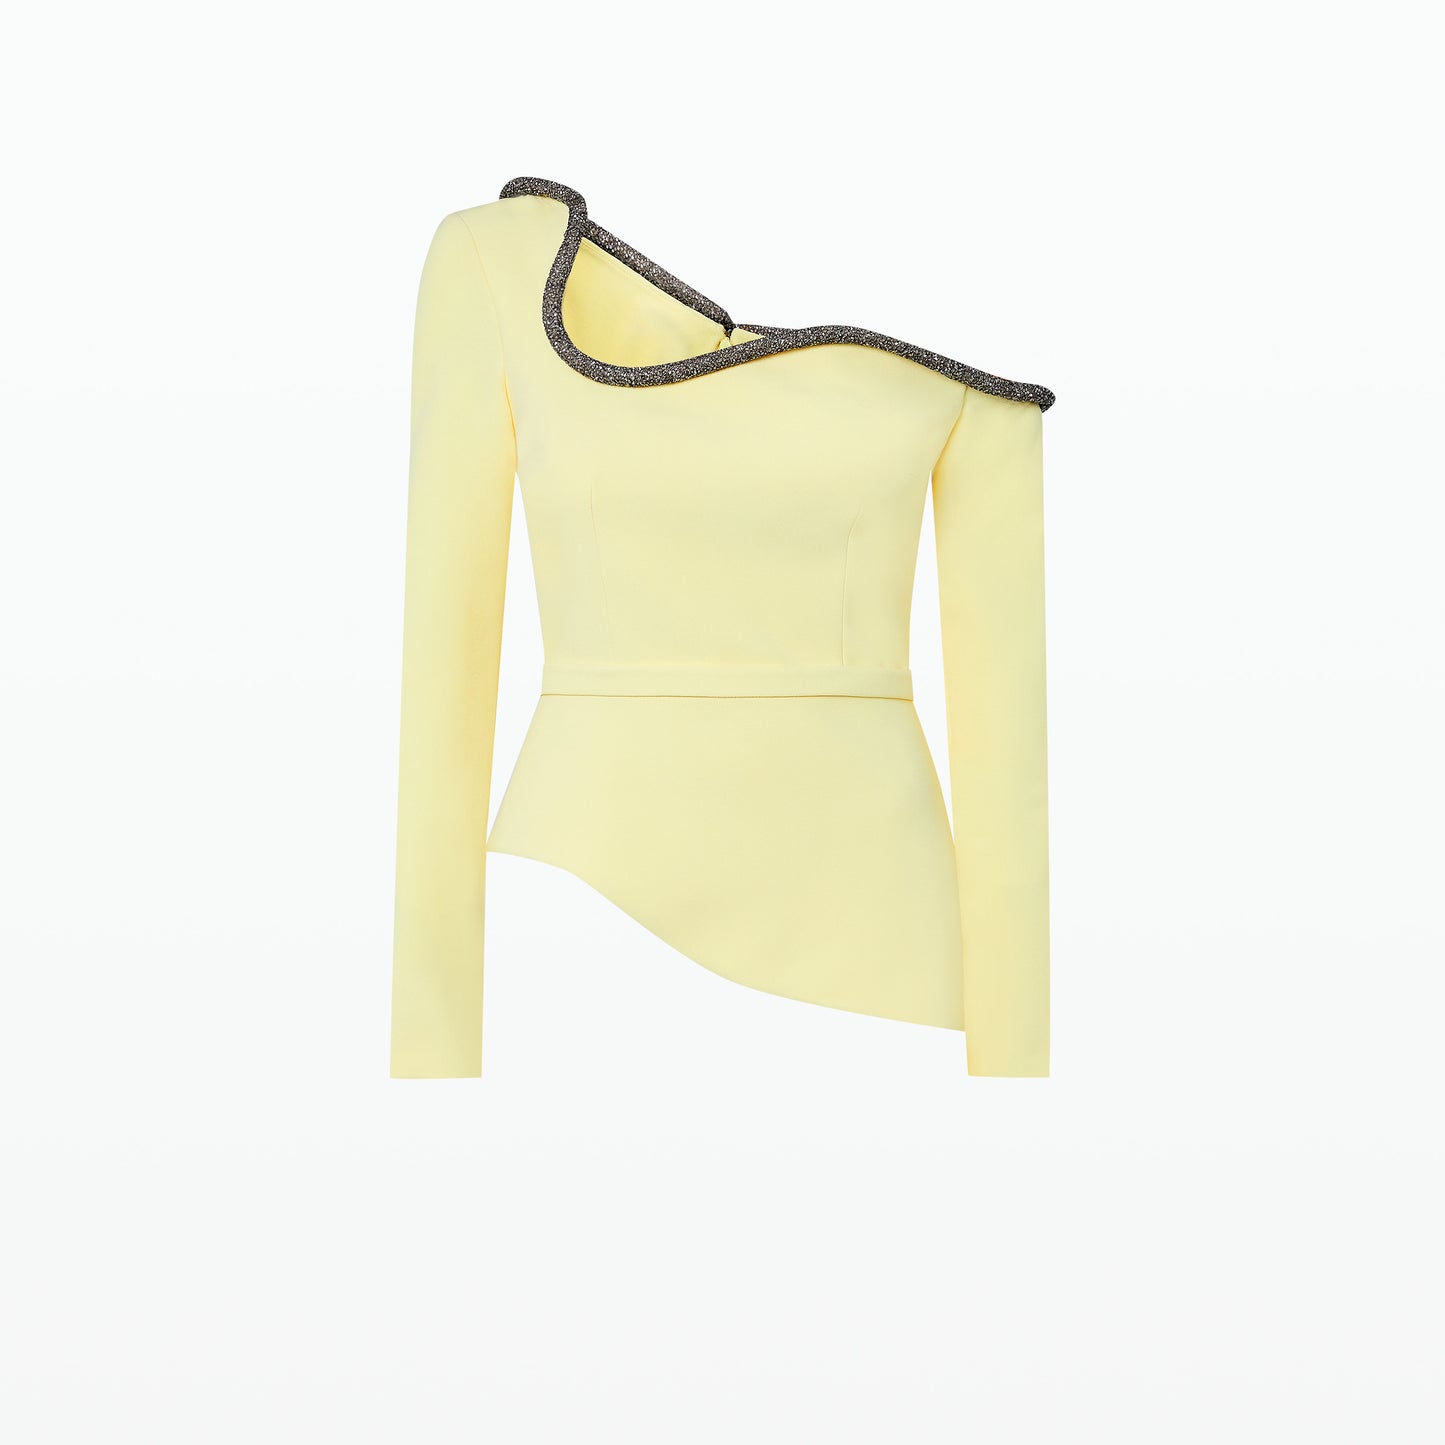 Aime Pale Yellow Top